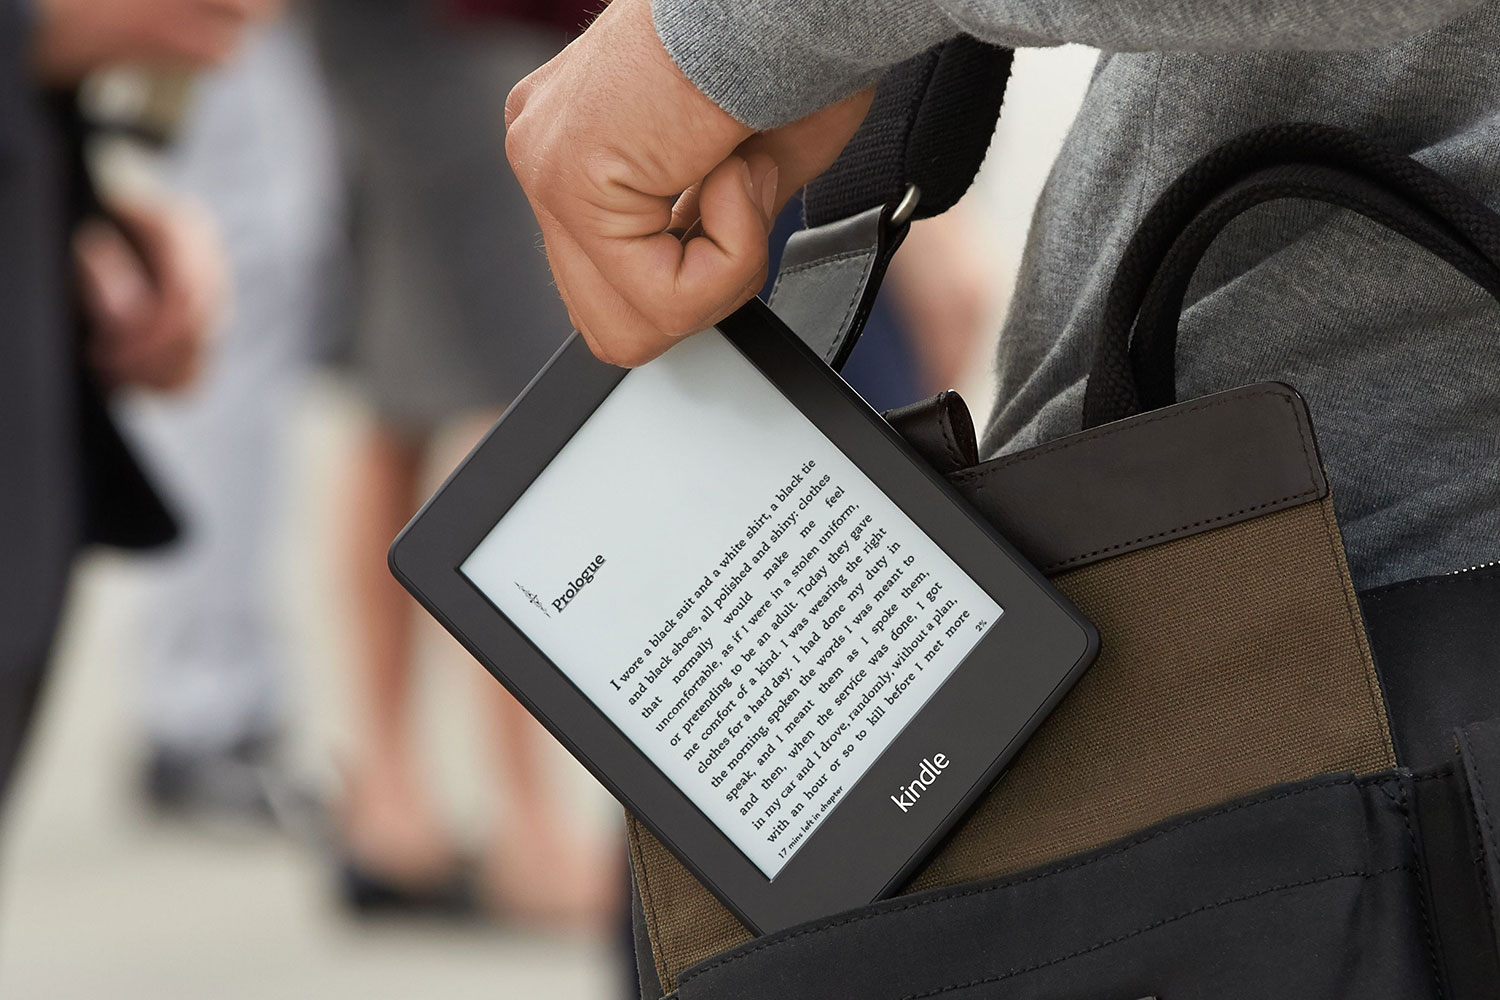 A close up of someone pulling a Kindle out of their bag.